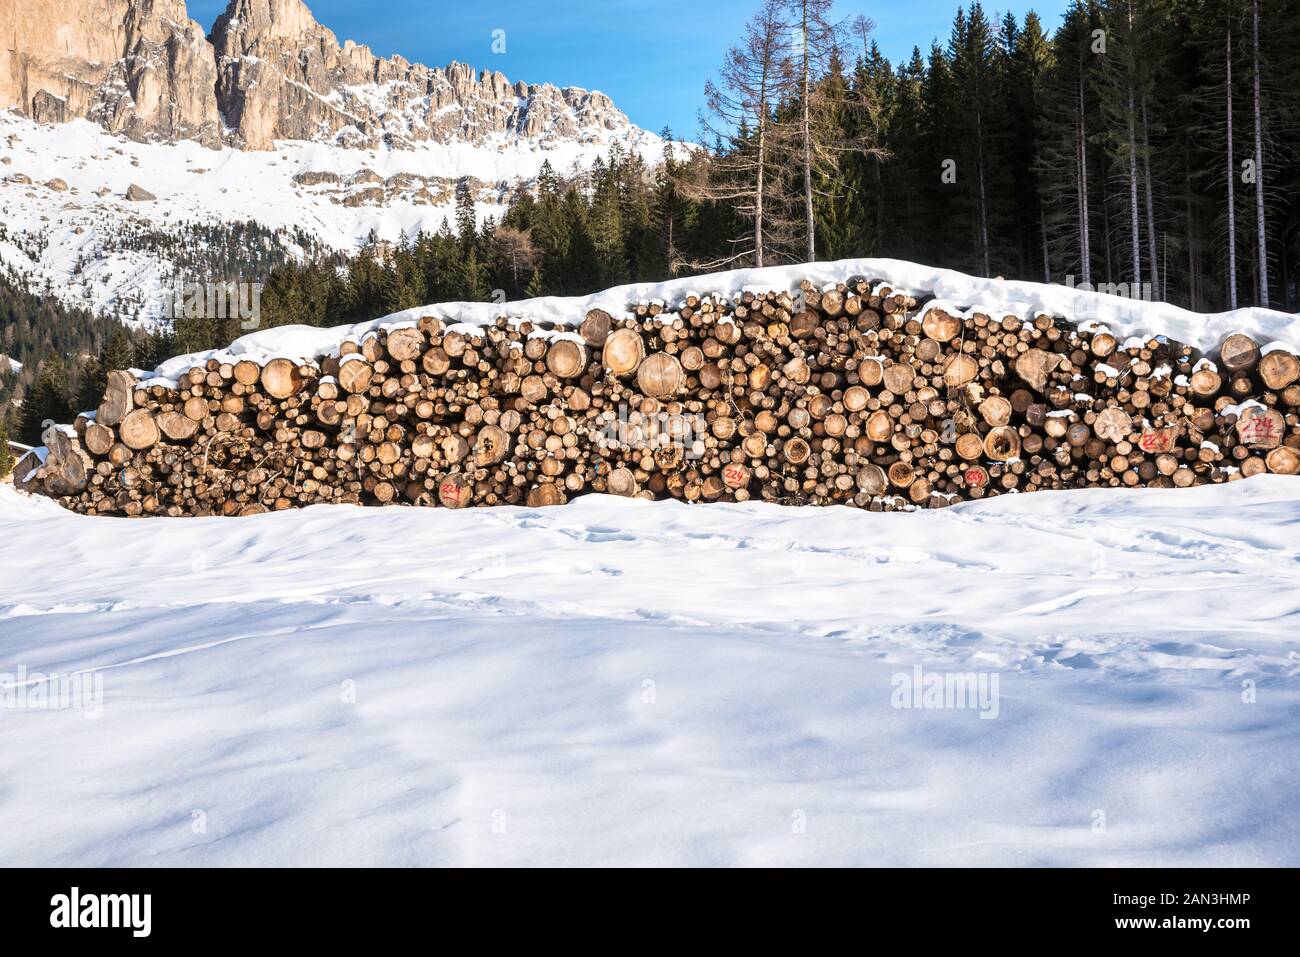 Pile of logs for timber industry with a pine forest in foreground in a snowy mountain scenery on a clea rwinter day Stock Photo